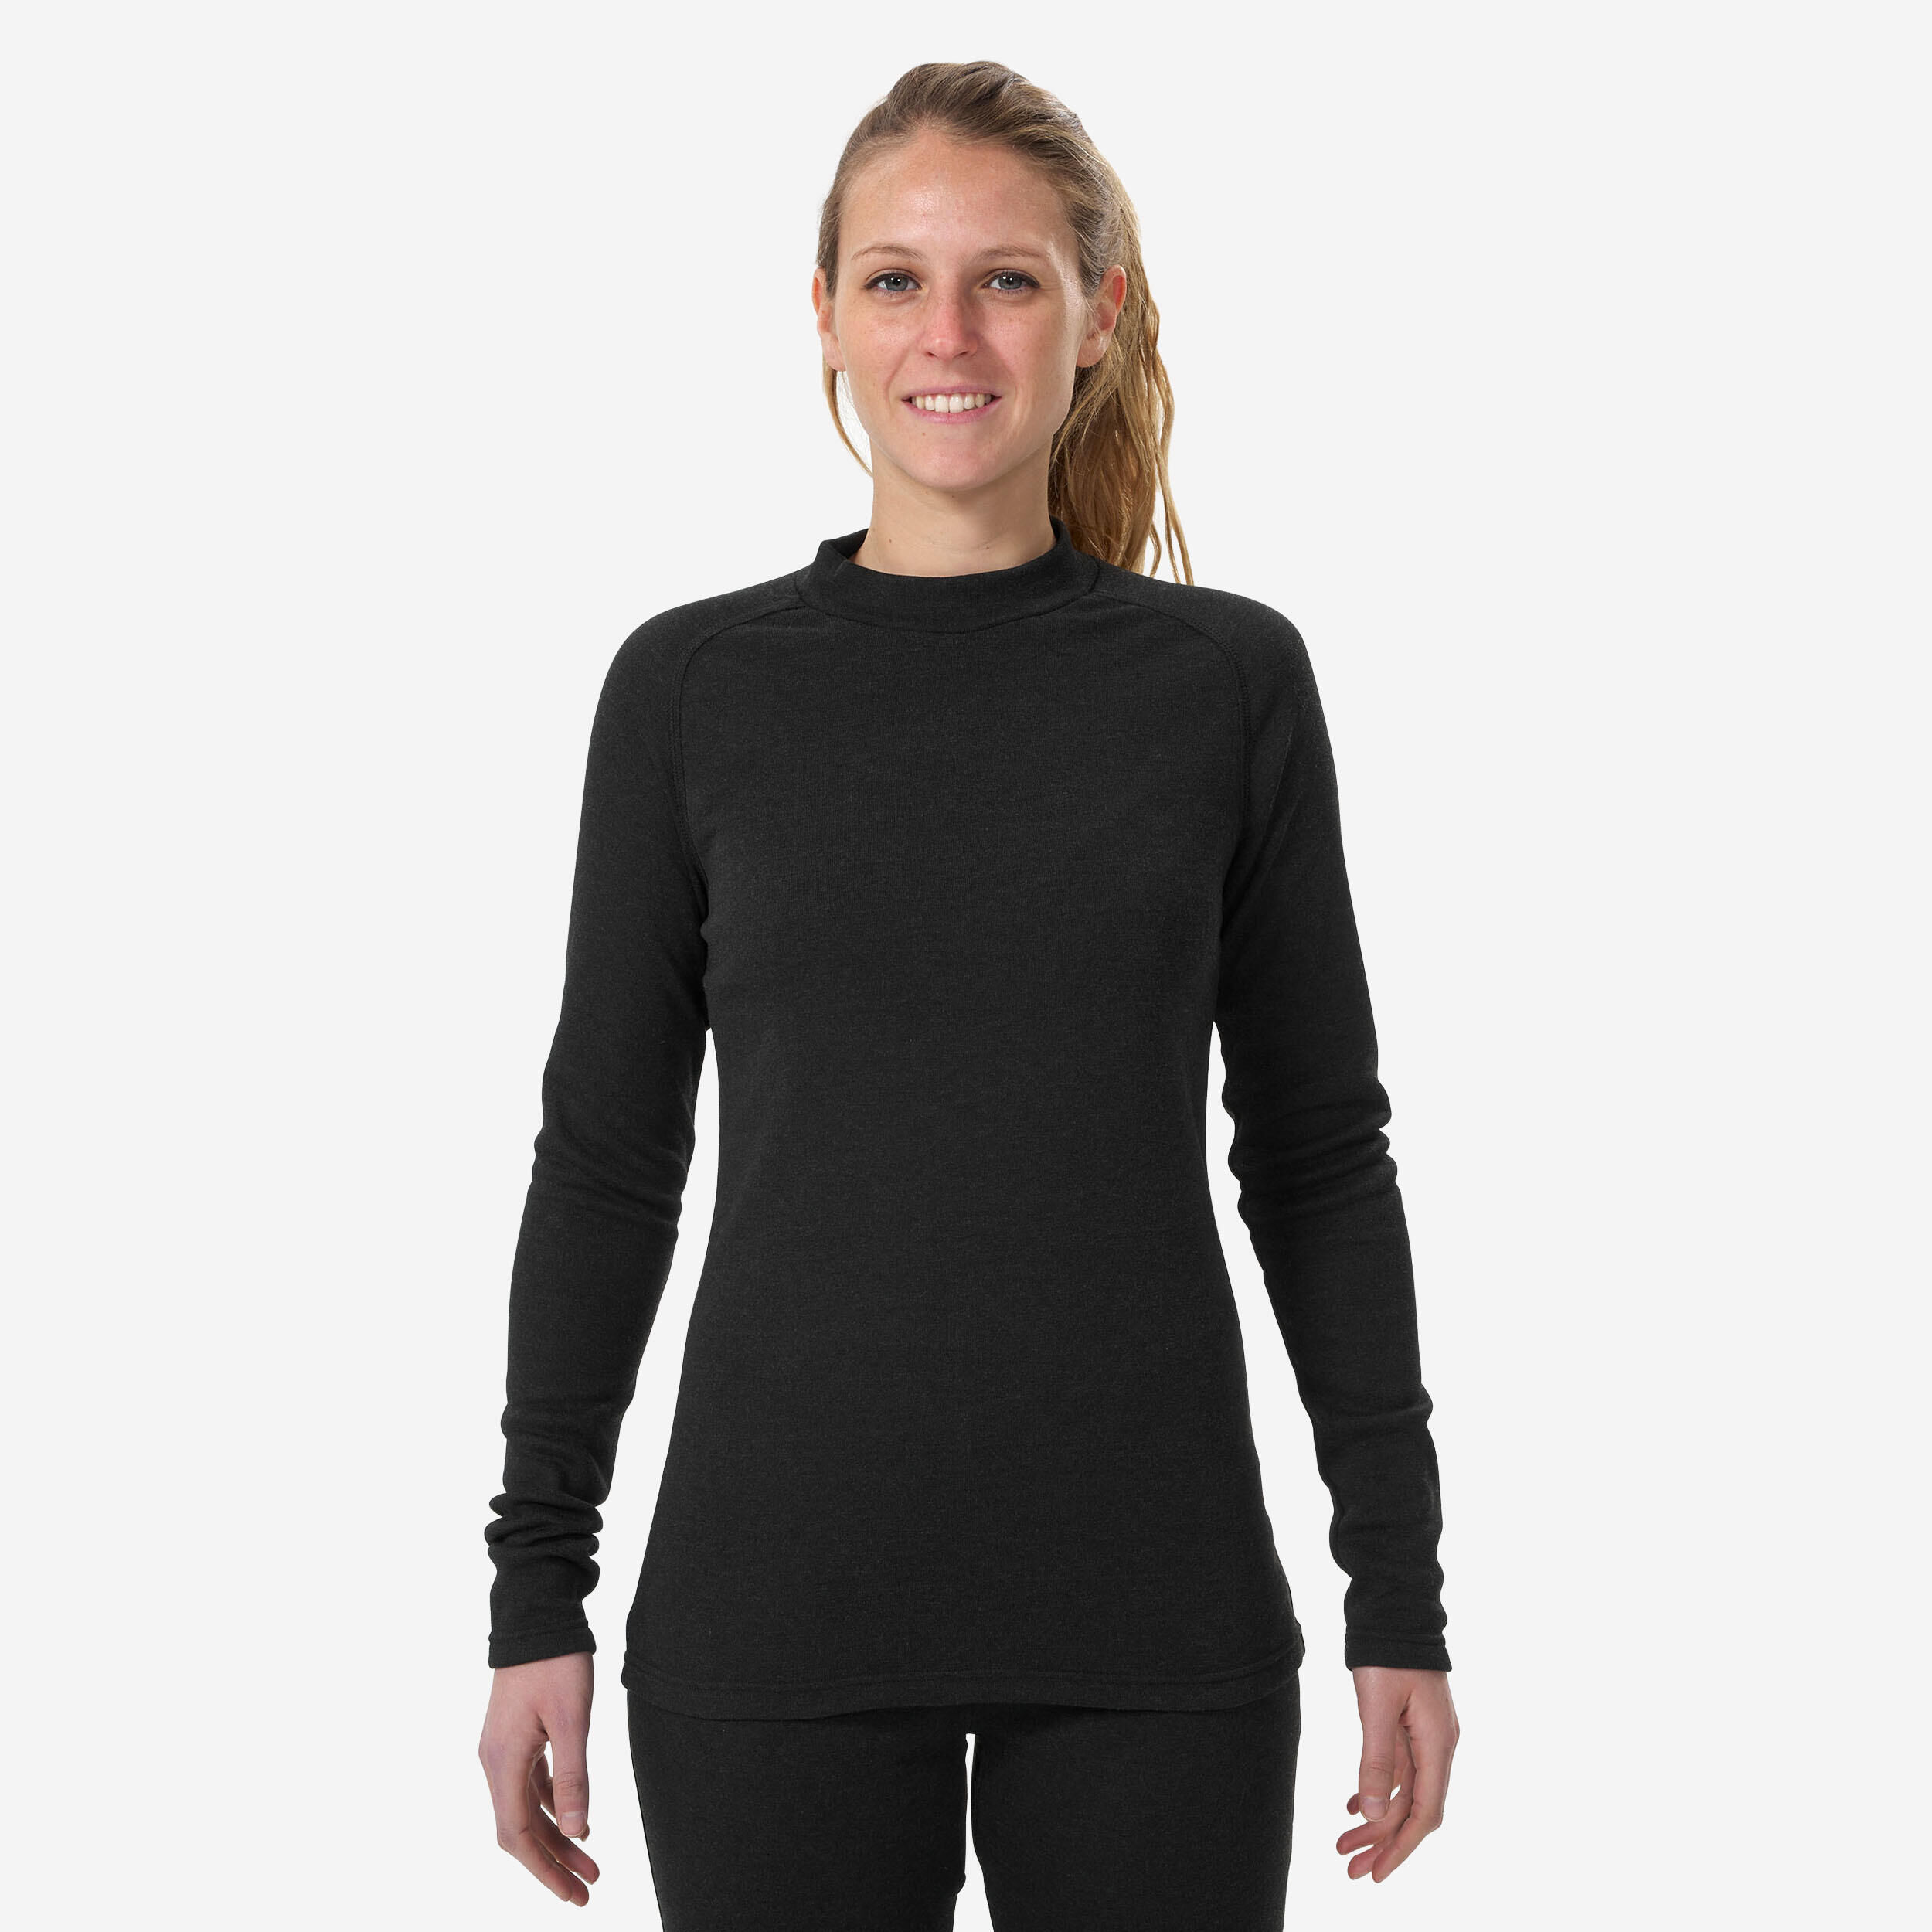 Women clothing - Sports and daily life clothing